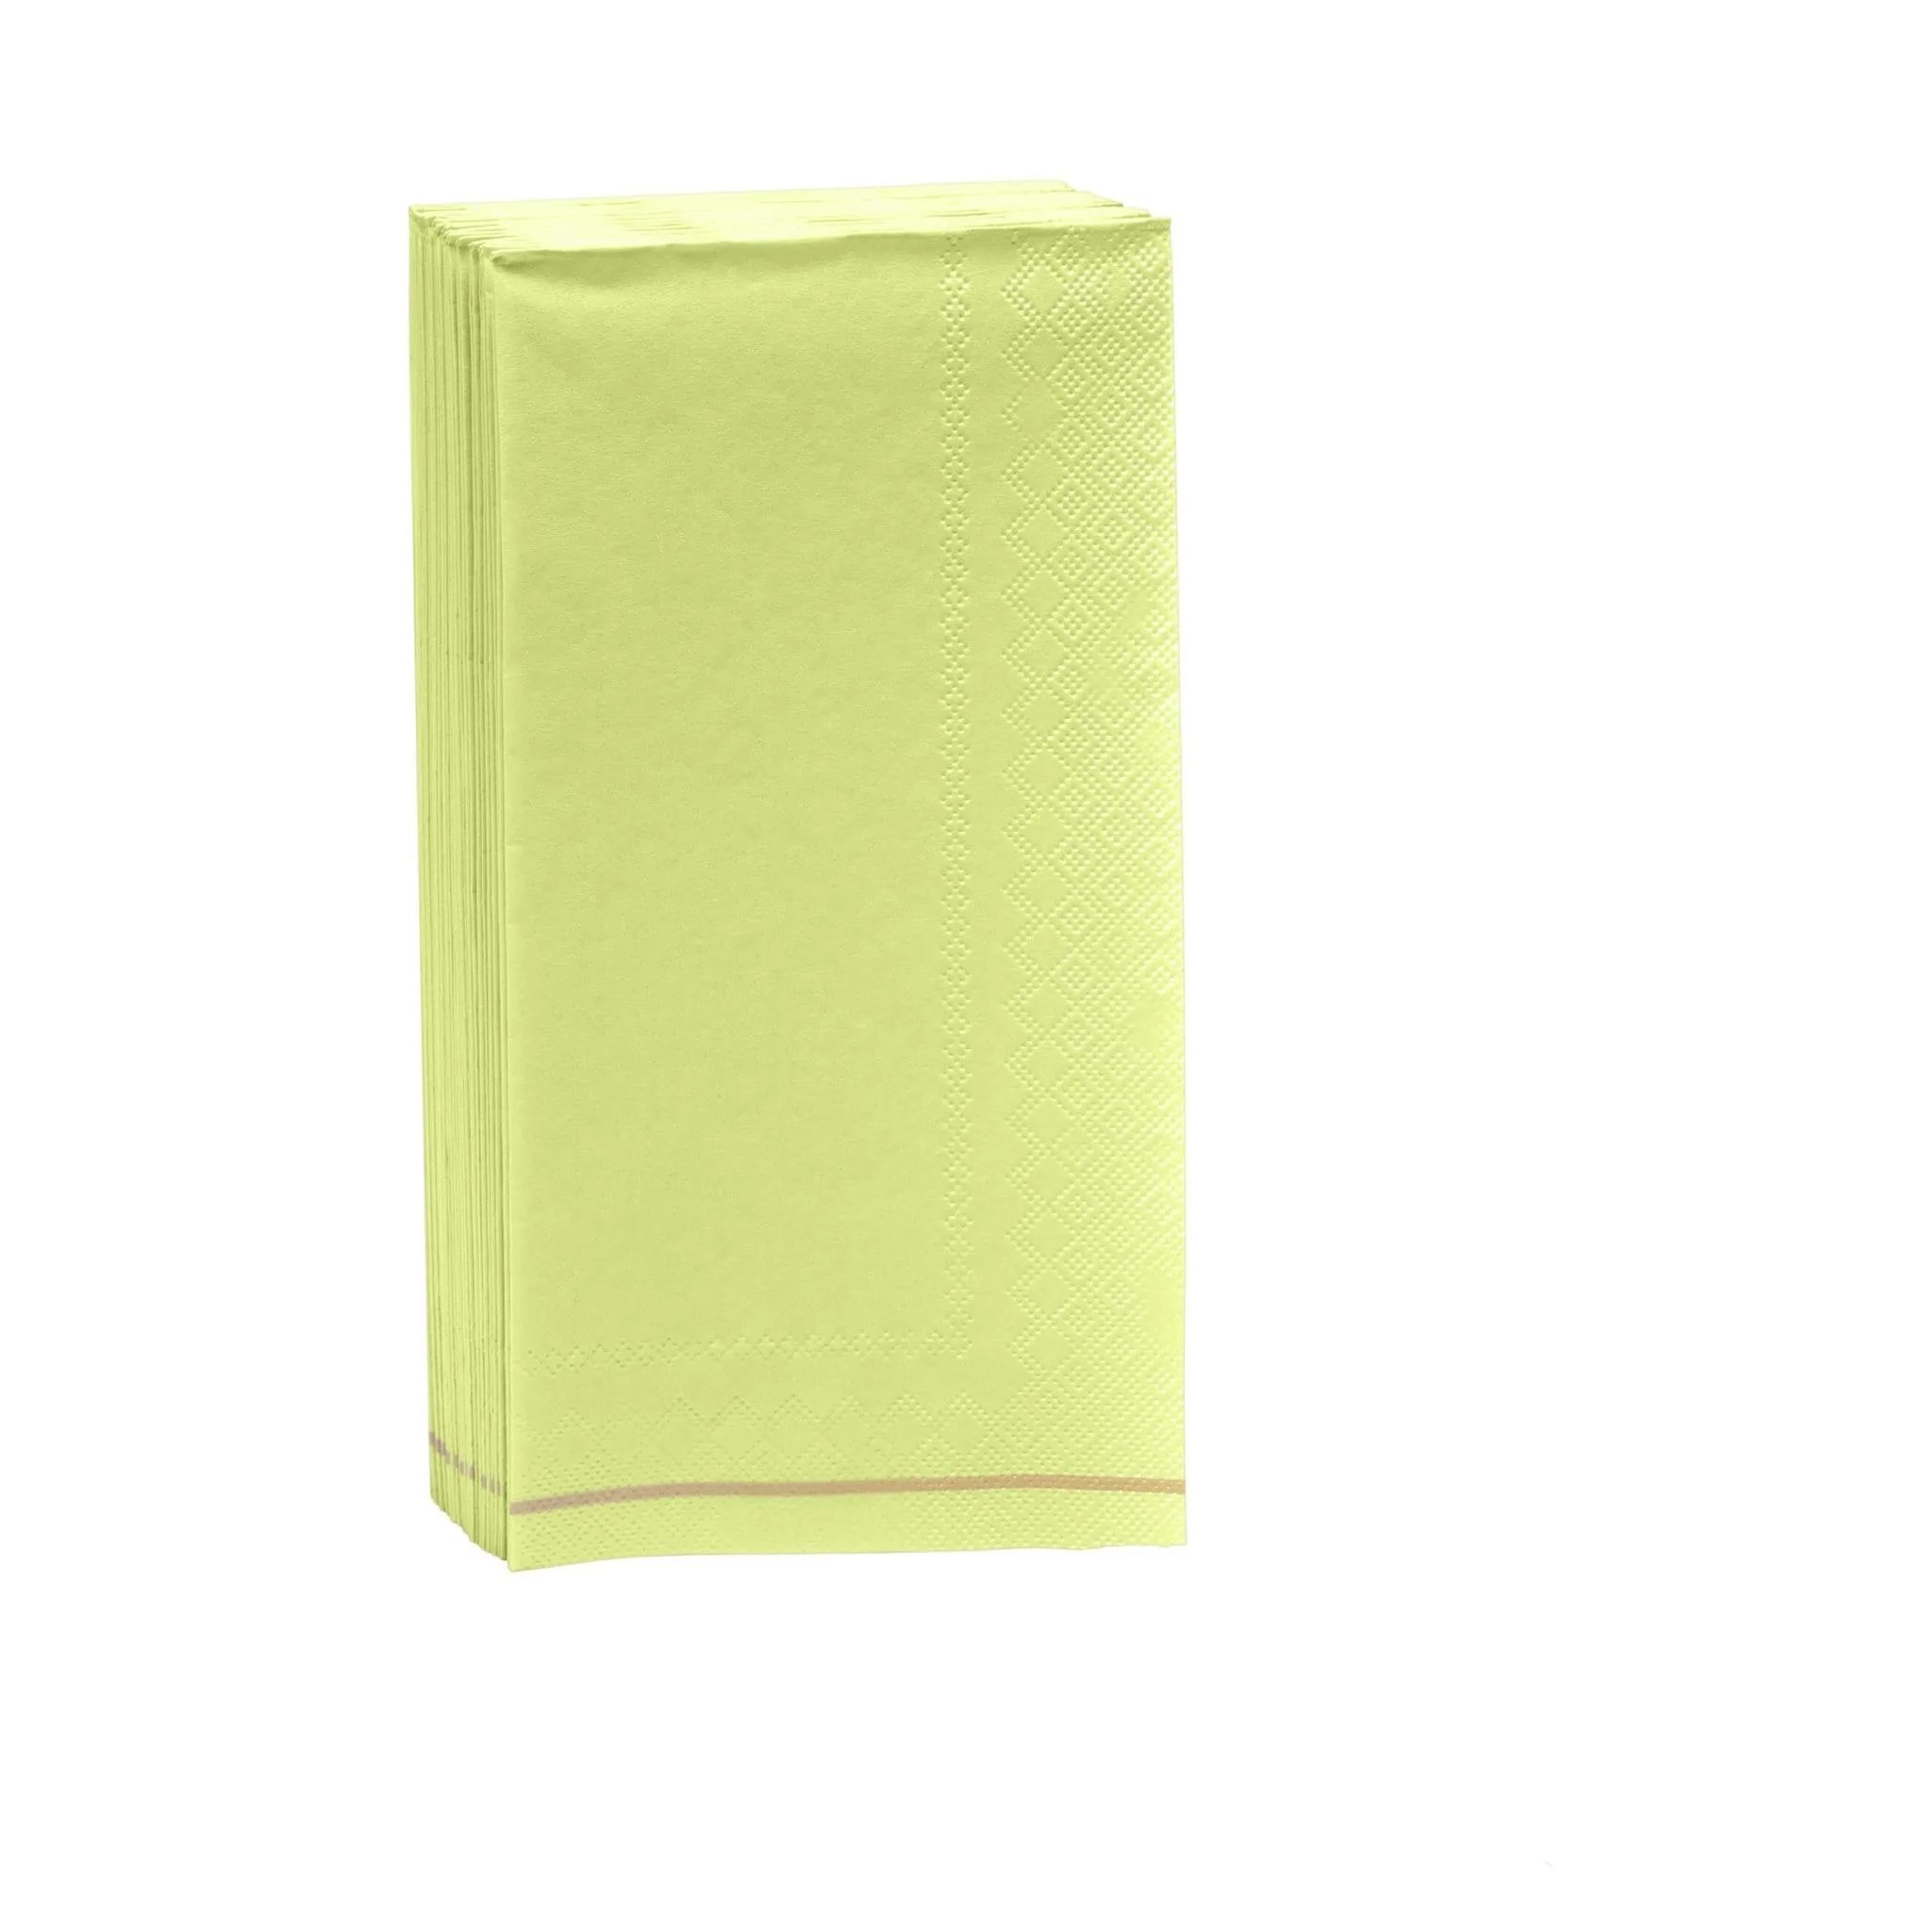 Luxe Party Lime with Gold Stripe Dinner Napkins - 16 pcs